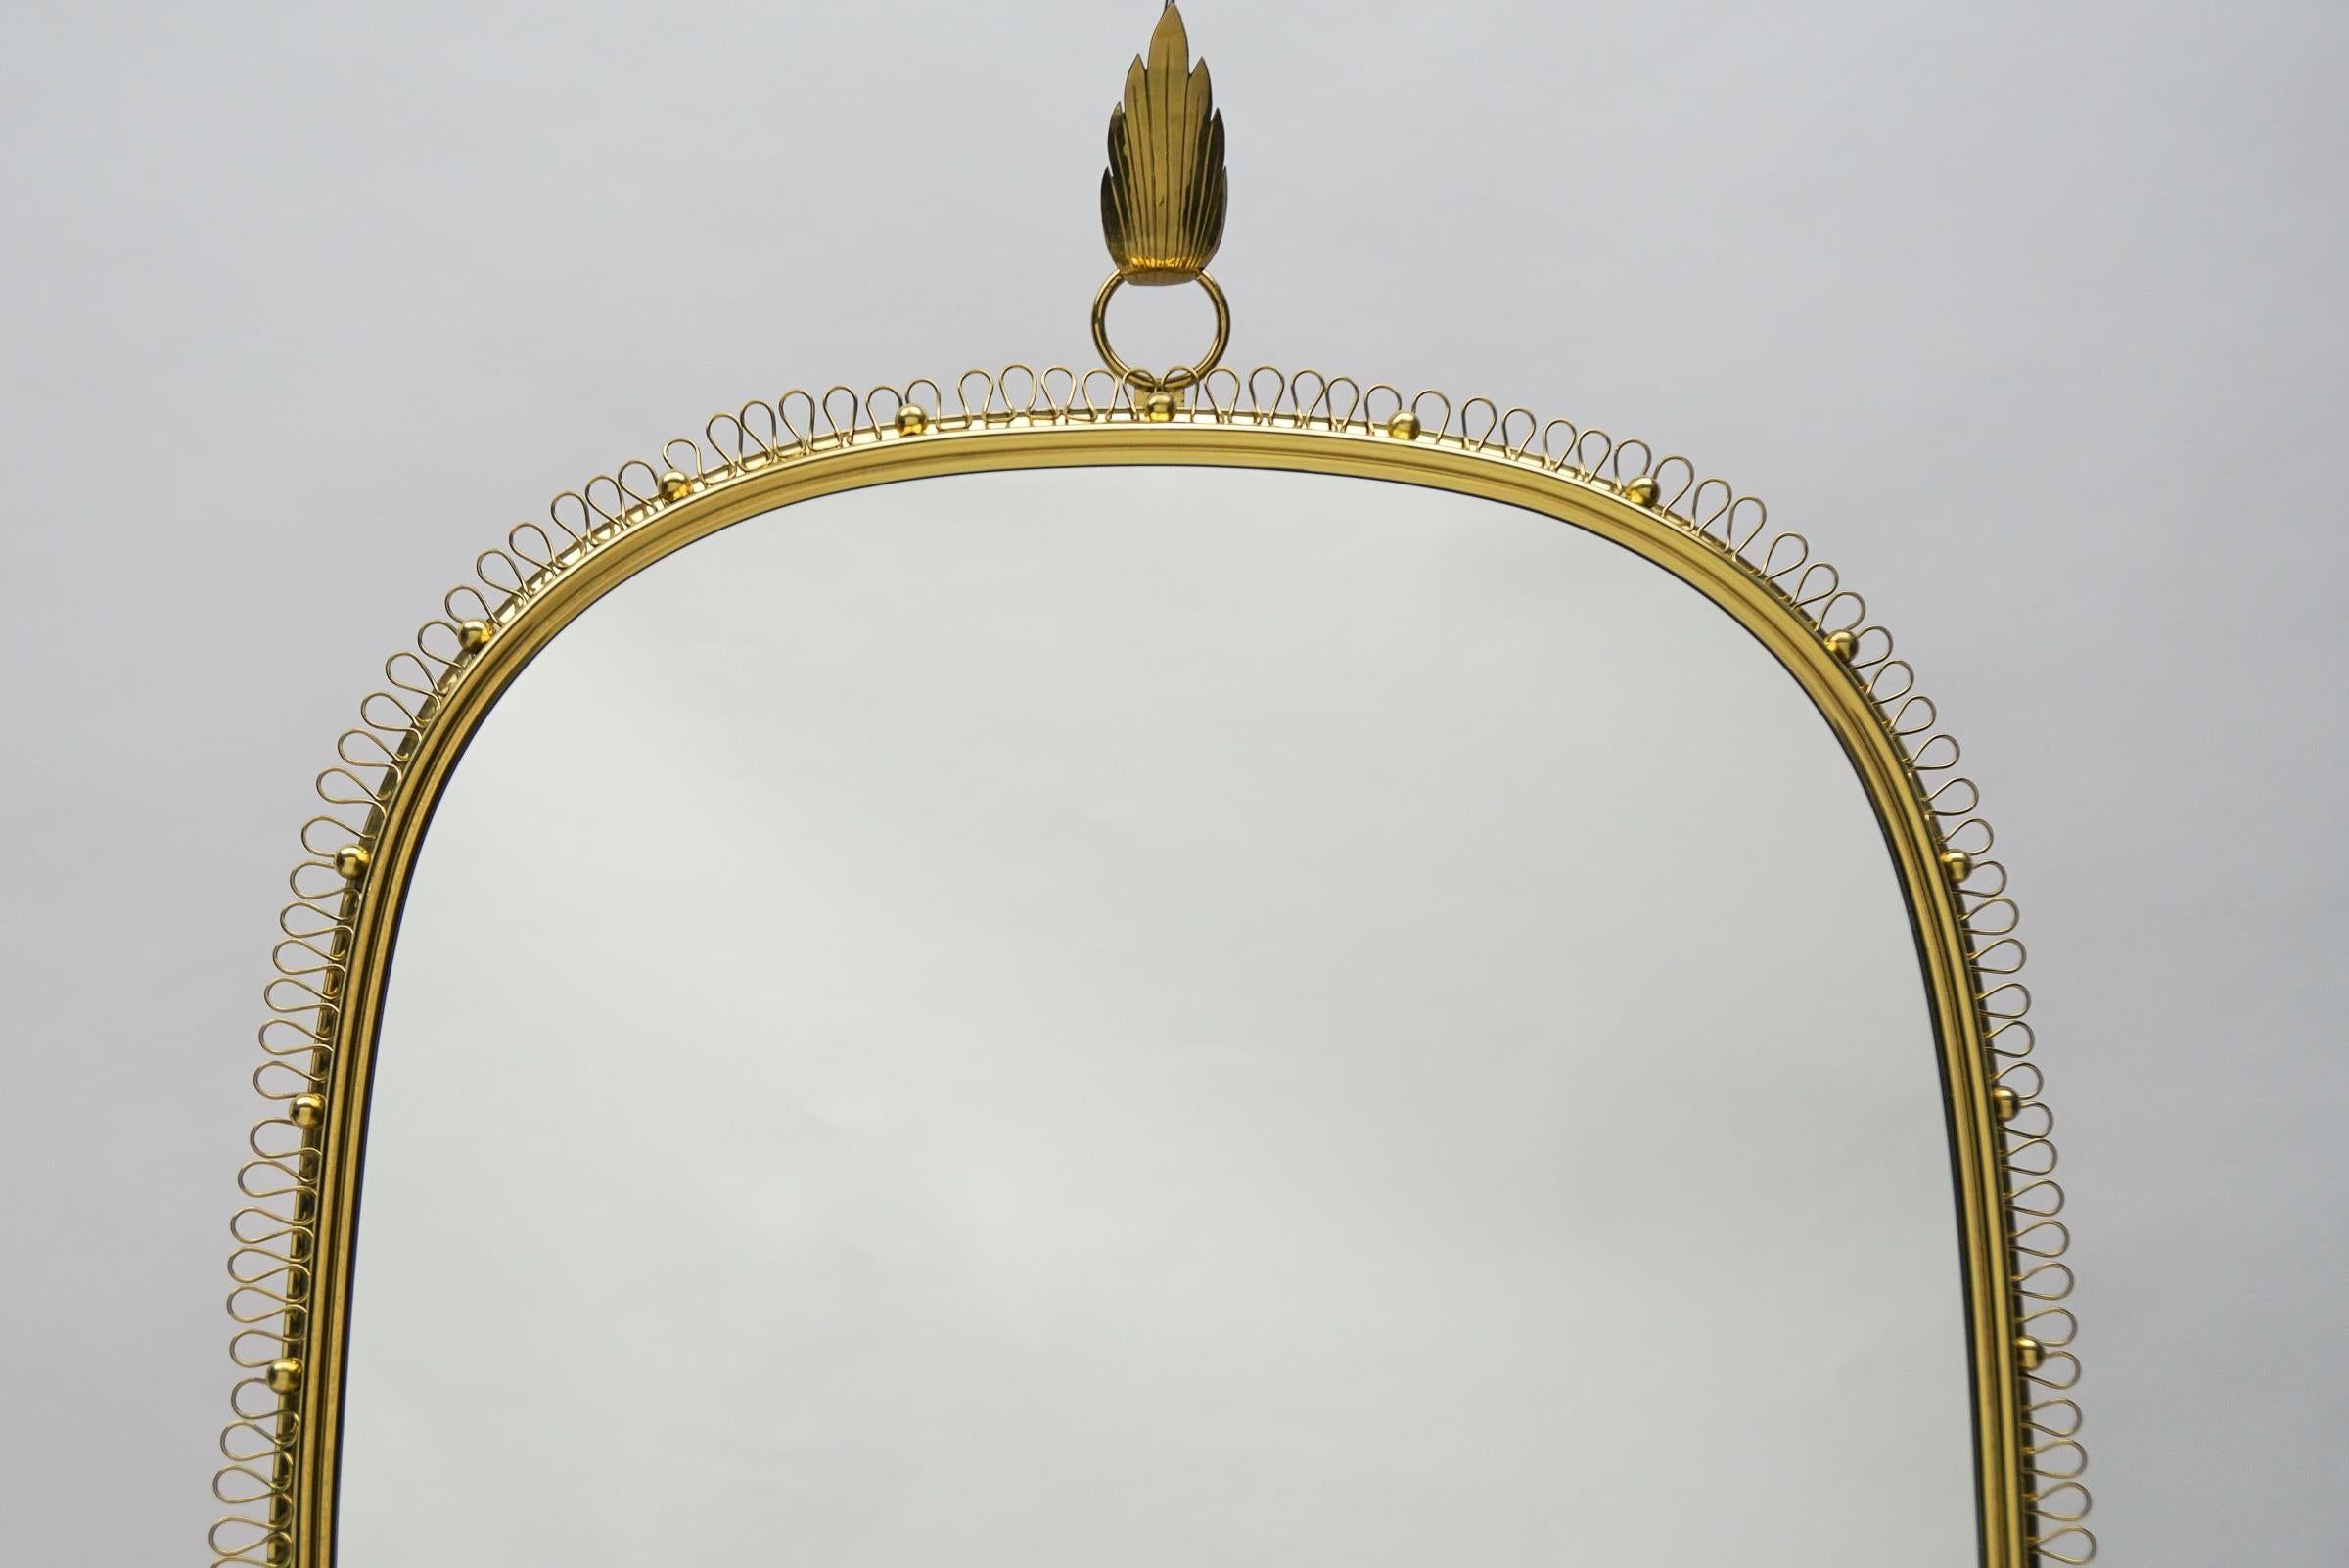 Mirror by Josef Frank for Svenskt Tenn from the 1950s. Golden color, in brass and glass.

The mirror without the leaf hook is Height: 41.34 in (105 cm), Width: 27.56 in (70 cm), Depth: 1.97 in (5 cm).